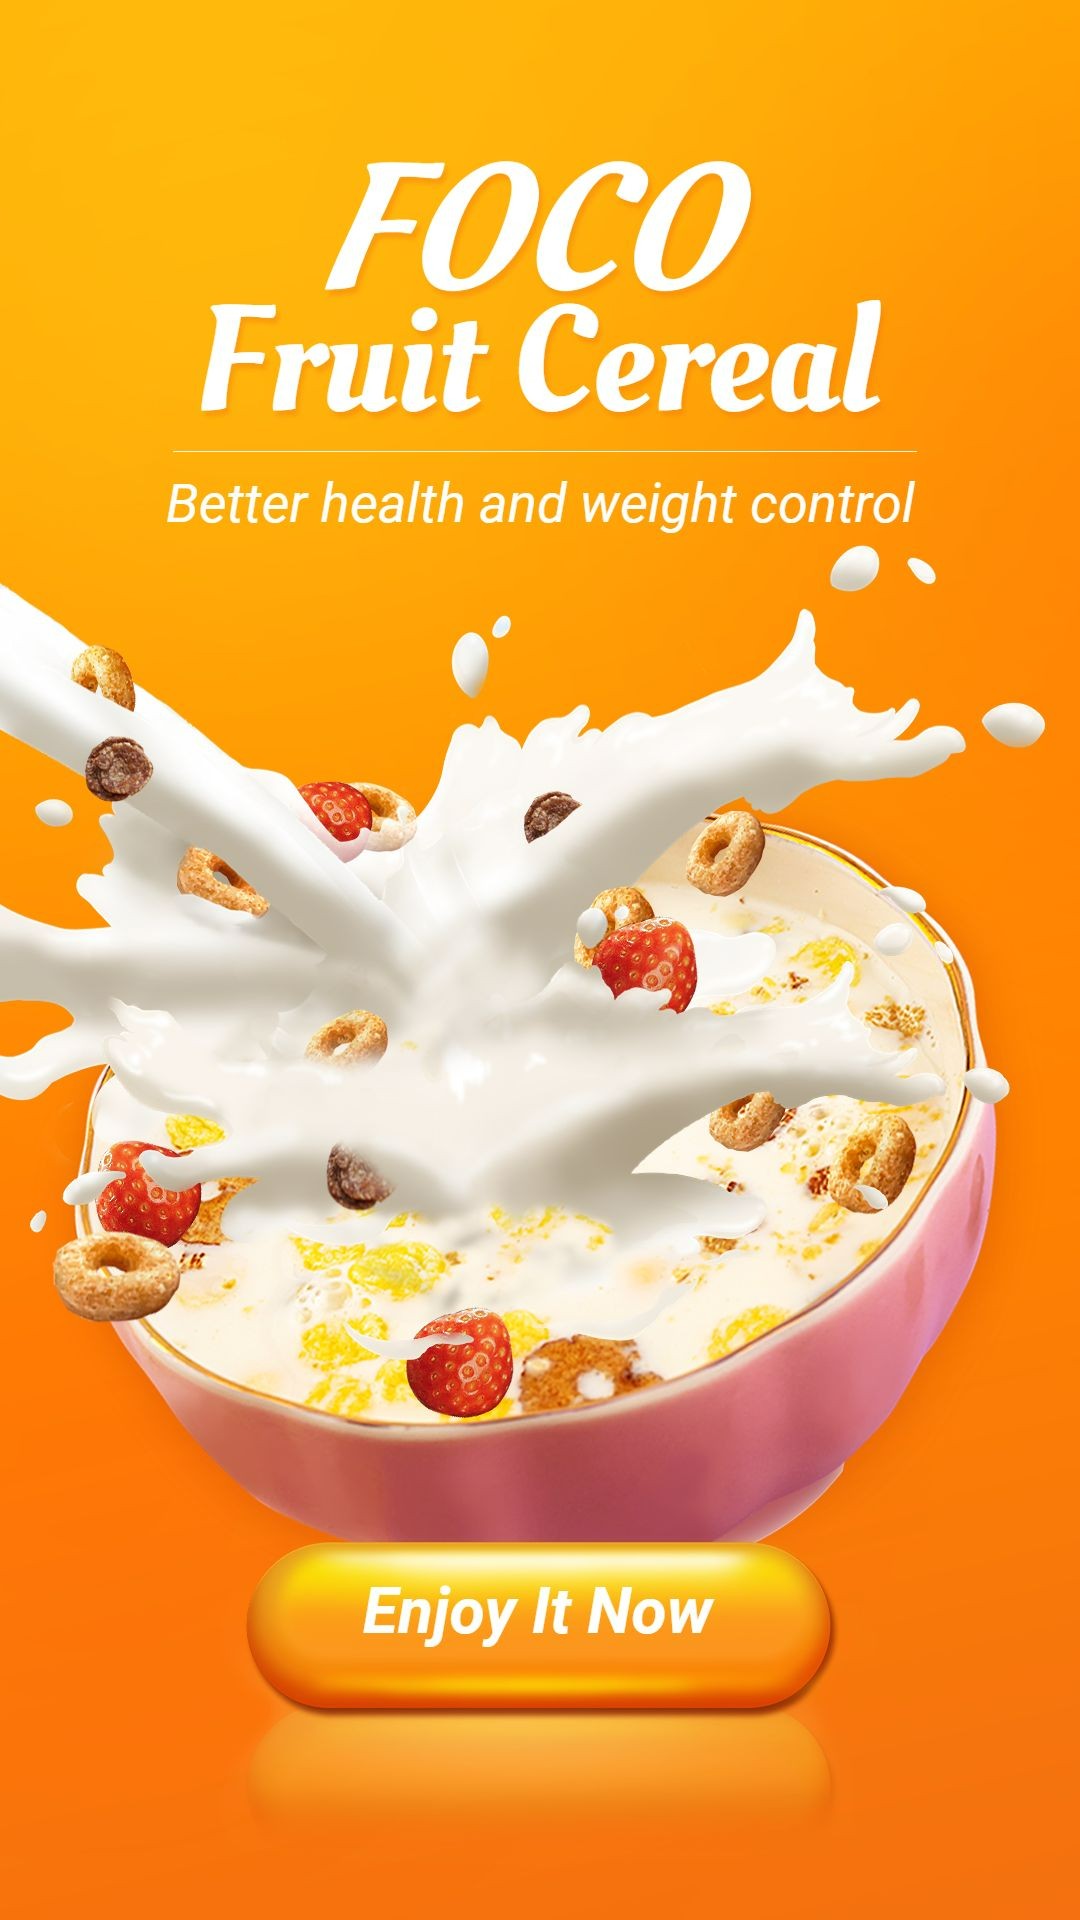 Breakfast Cereal Healthy Snacks Consumer Packaged Food and Groceries Promo Ecommerce Story预览效果